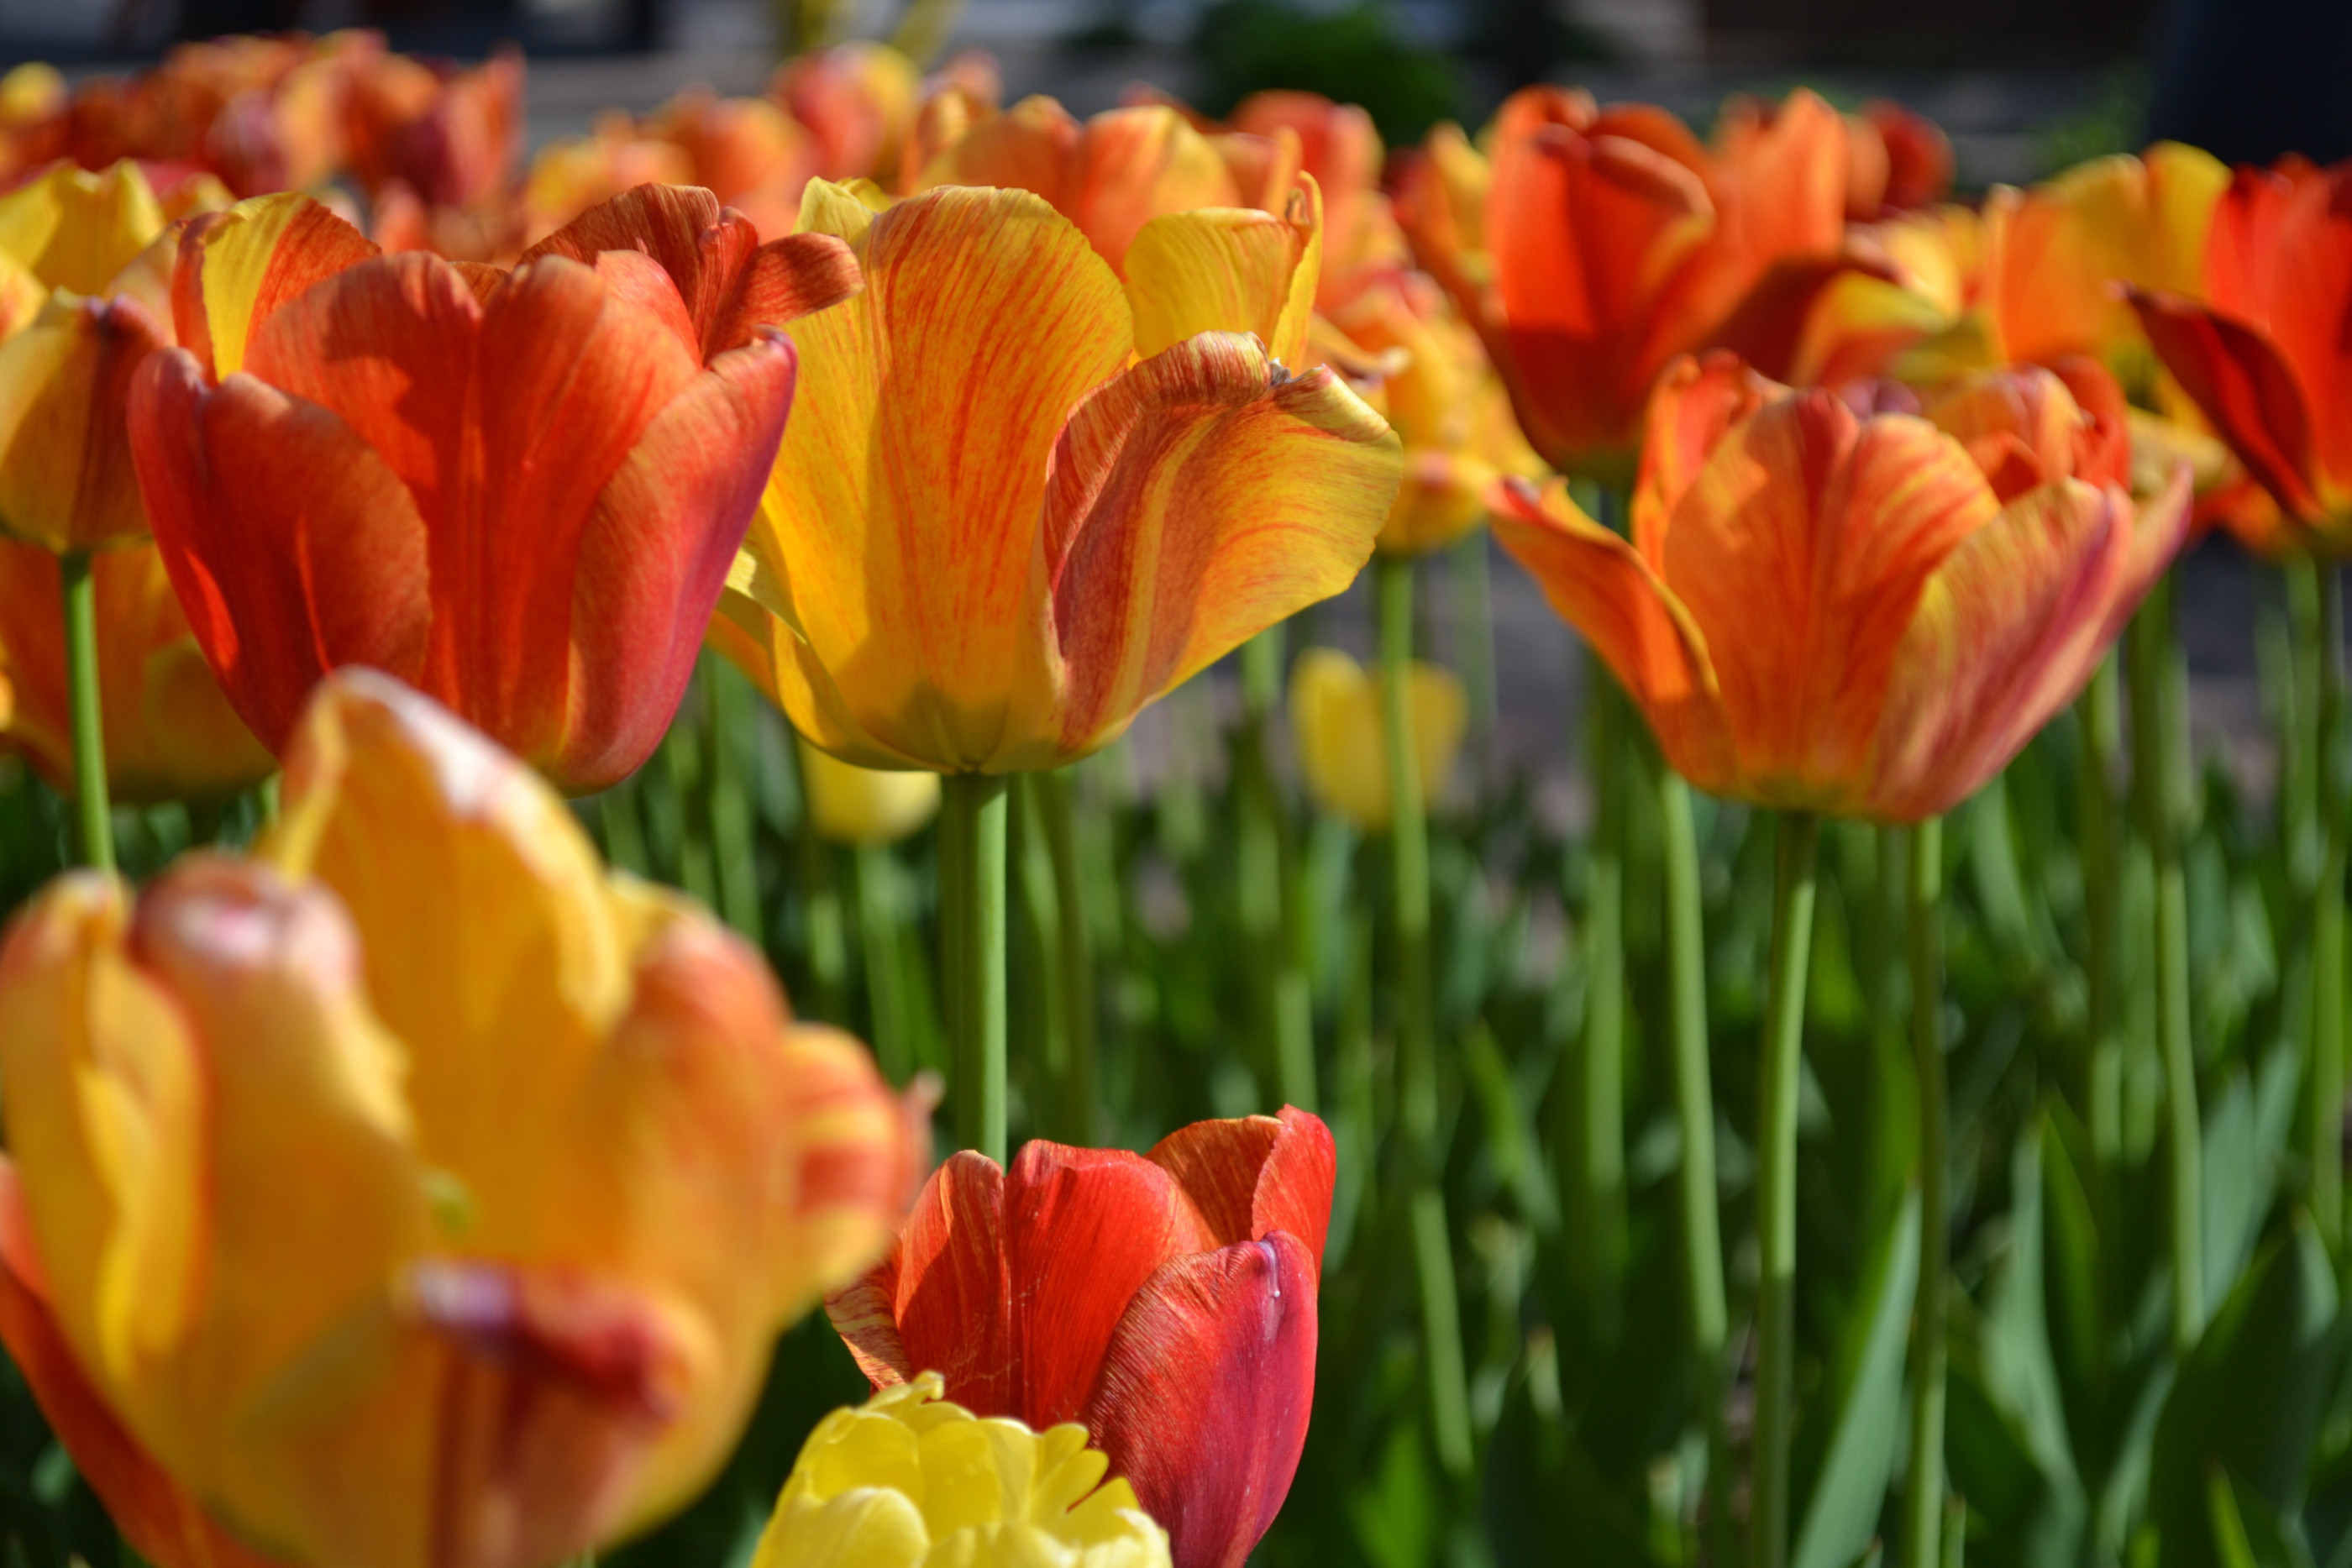 A patch of orange tulips in bloom